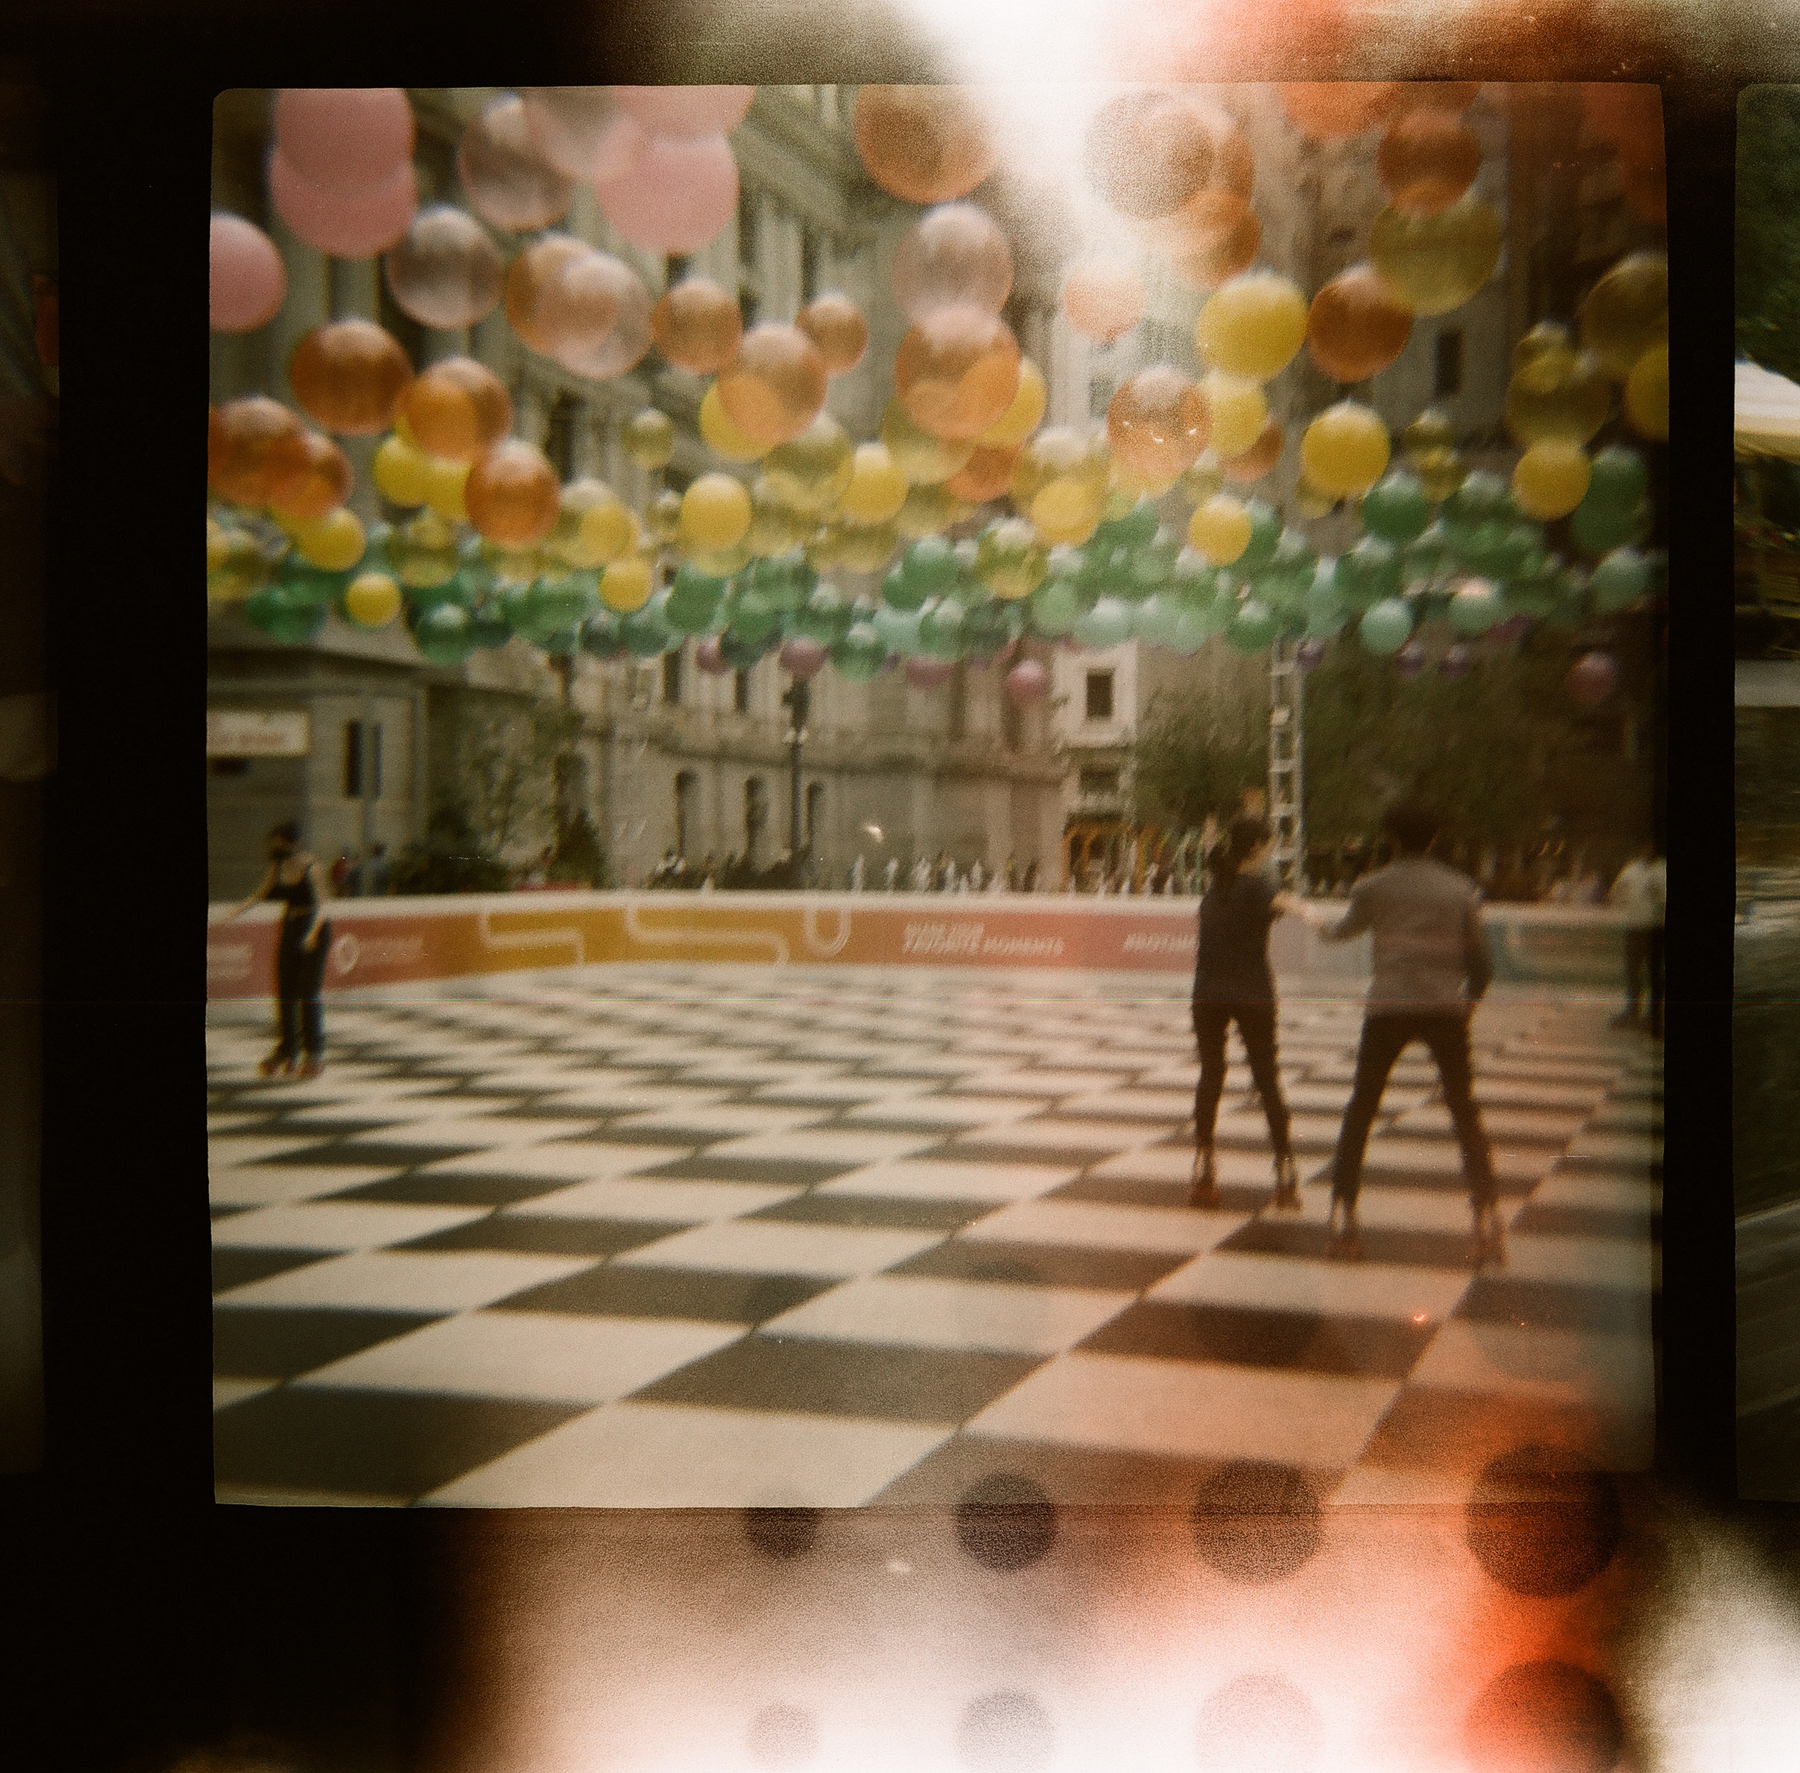 A vintage photograph with light leaks portrays people rollerskating on a checkerboard floor rink under a canopy on balloons. Image courtesy of Marina Outwater